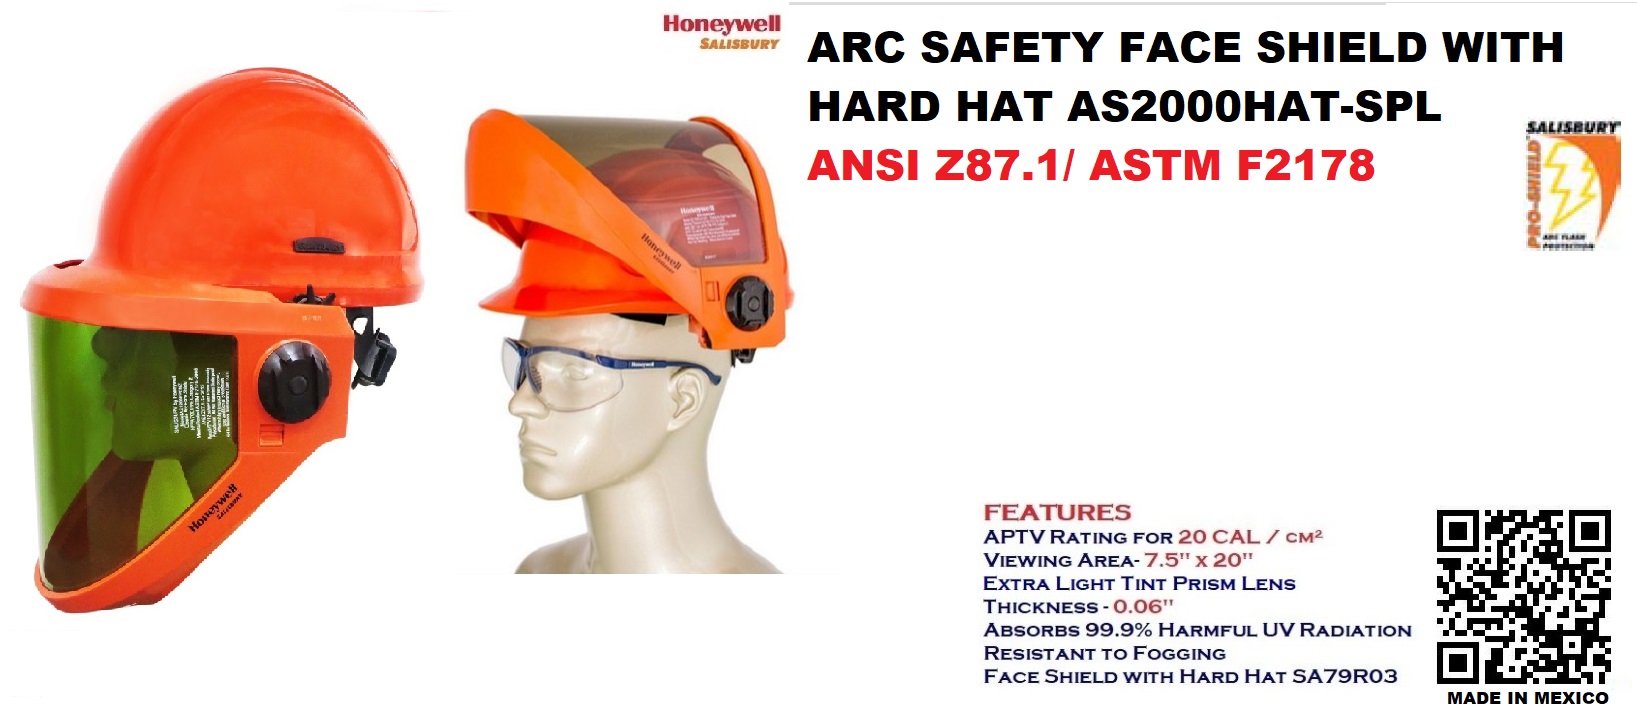 ARC SAFETY FACE SHIELD WITH HELMET 20 CAL